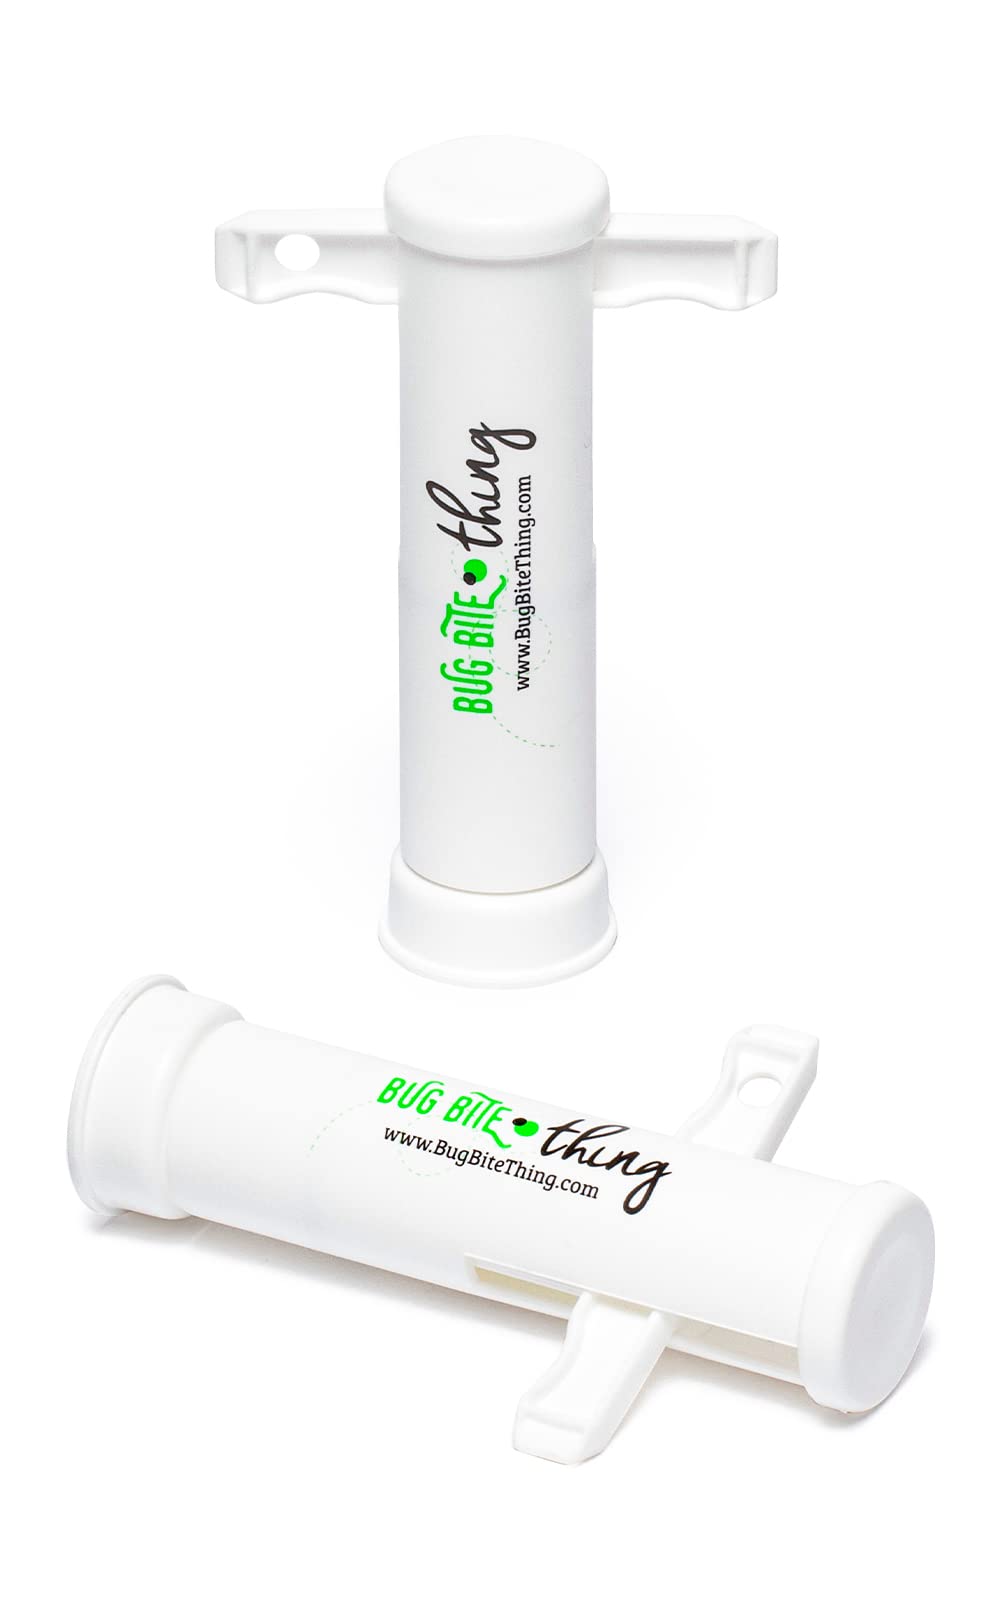 BUG BITE THING Suction Tool, Poison Remover - Bug Bites and Bee/Wasp Stings, Natural Insect Bite Relief - White 2-Pack